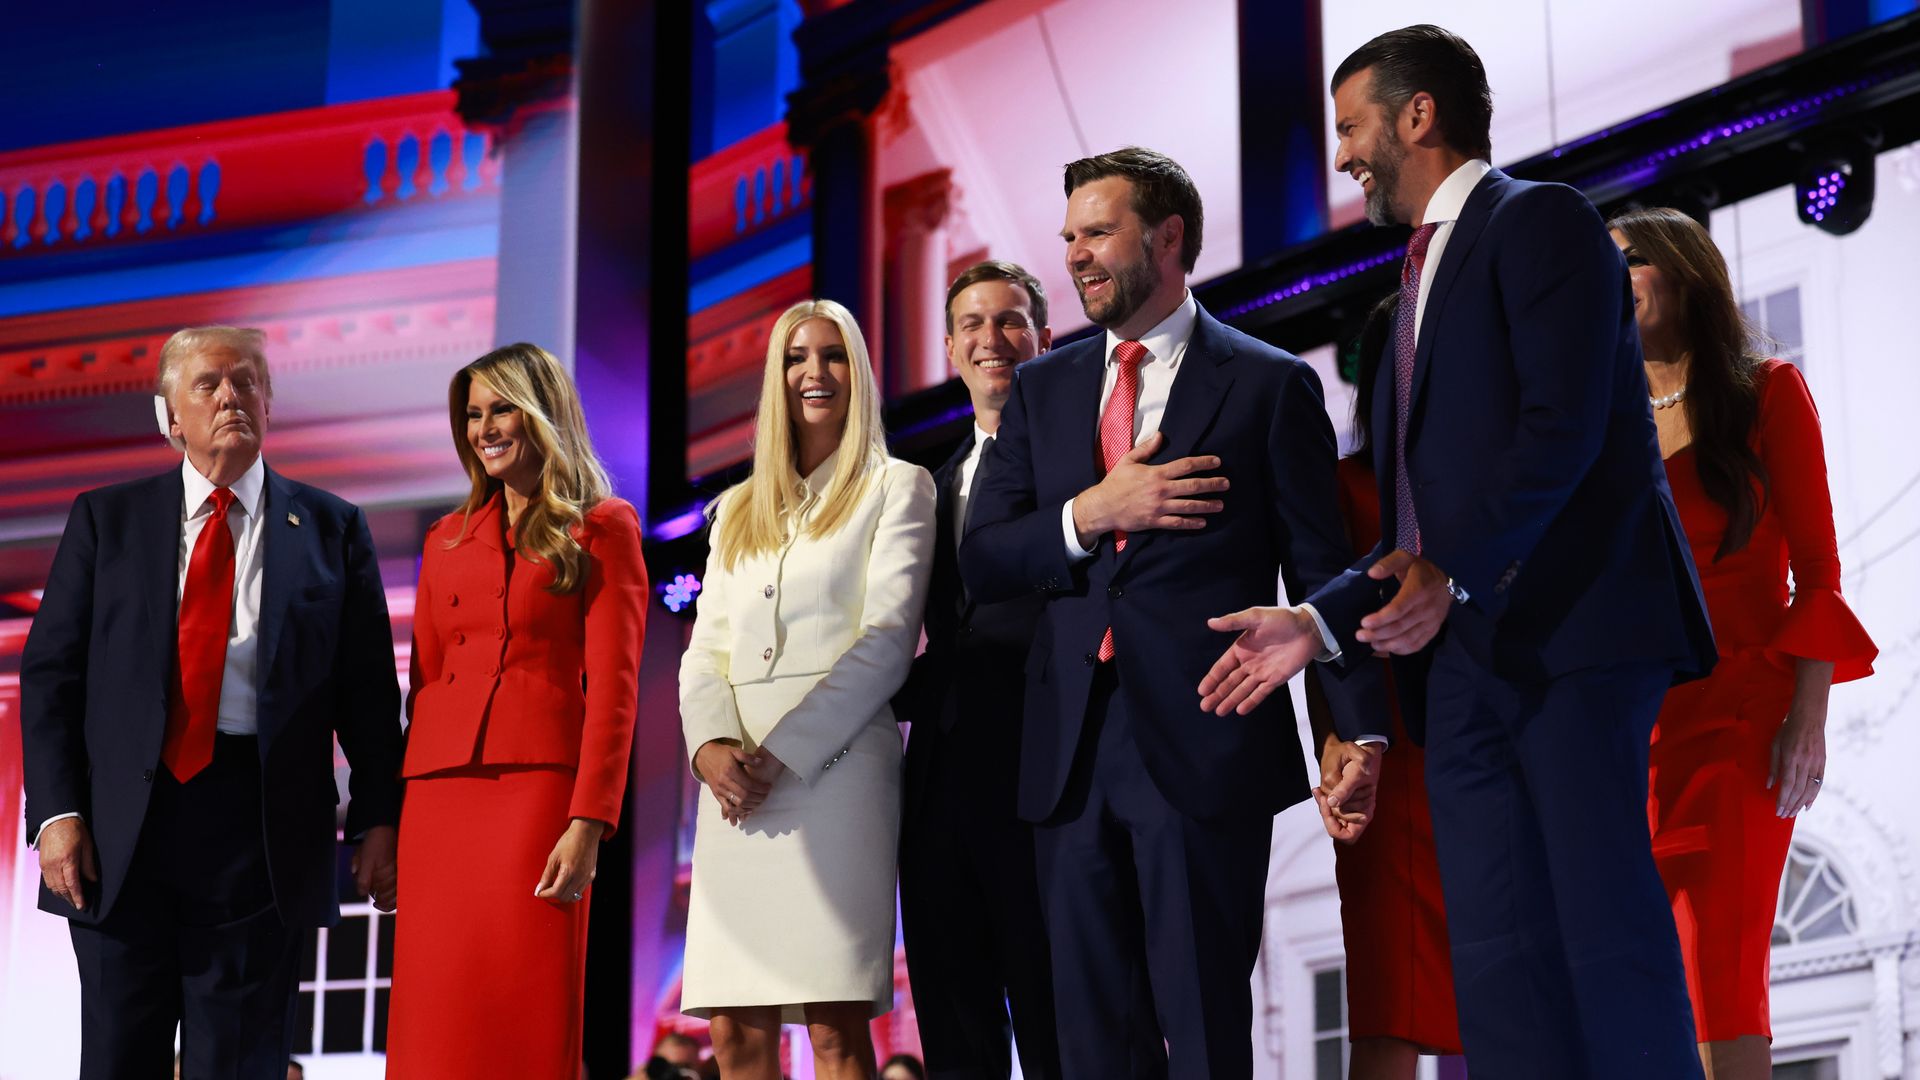 (De izq. a der.) El candidato republicano Donald Trump, la exprimera dama Melania Trump, Ivanka Trump, hija del expresidente Trump, Jared Kushner, yerno de Donald Trump, el candidato Republicano a vicepresidente J.D. Vance, Donald Trump Jr., son of former U.S. President Donald Trump, celebrate on the fourth day of the Republican National Convention at the Fiserv Forum on July 18, 2024 in Milwaukee, Wisconsin. Delegates, politicians, and the Republican faithful are in Milwaukee for the annual convention, concluding with former President Donald Trump accepting his party's presidential nomination. The RNC takes place from July 15-18. (Photo by Joe Raedle/Getty Images)